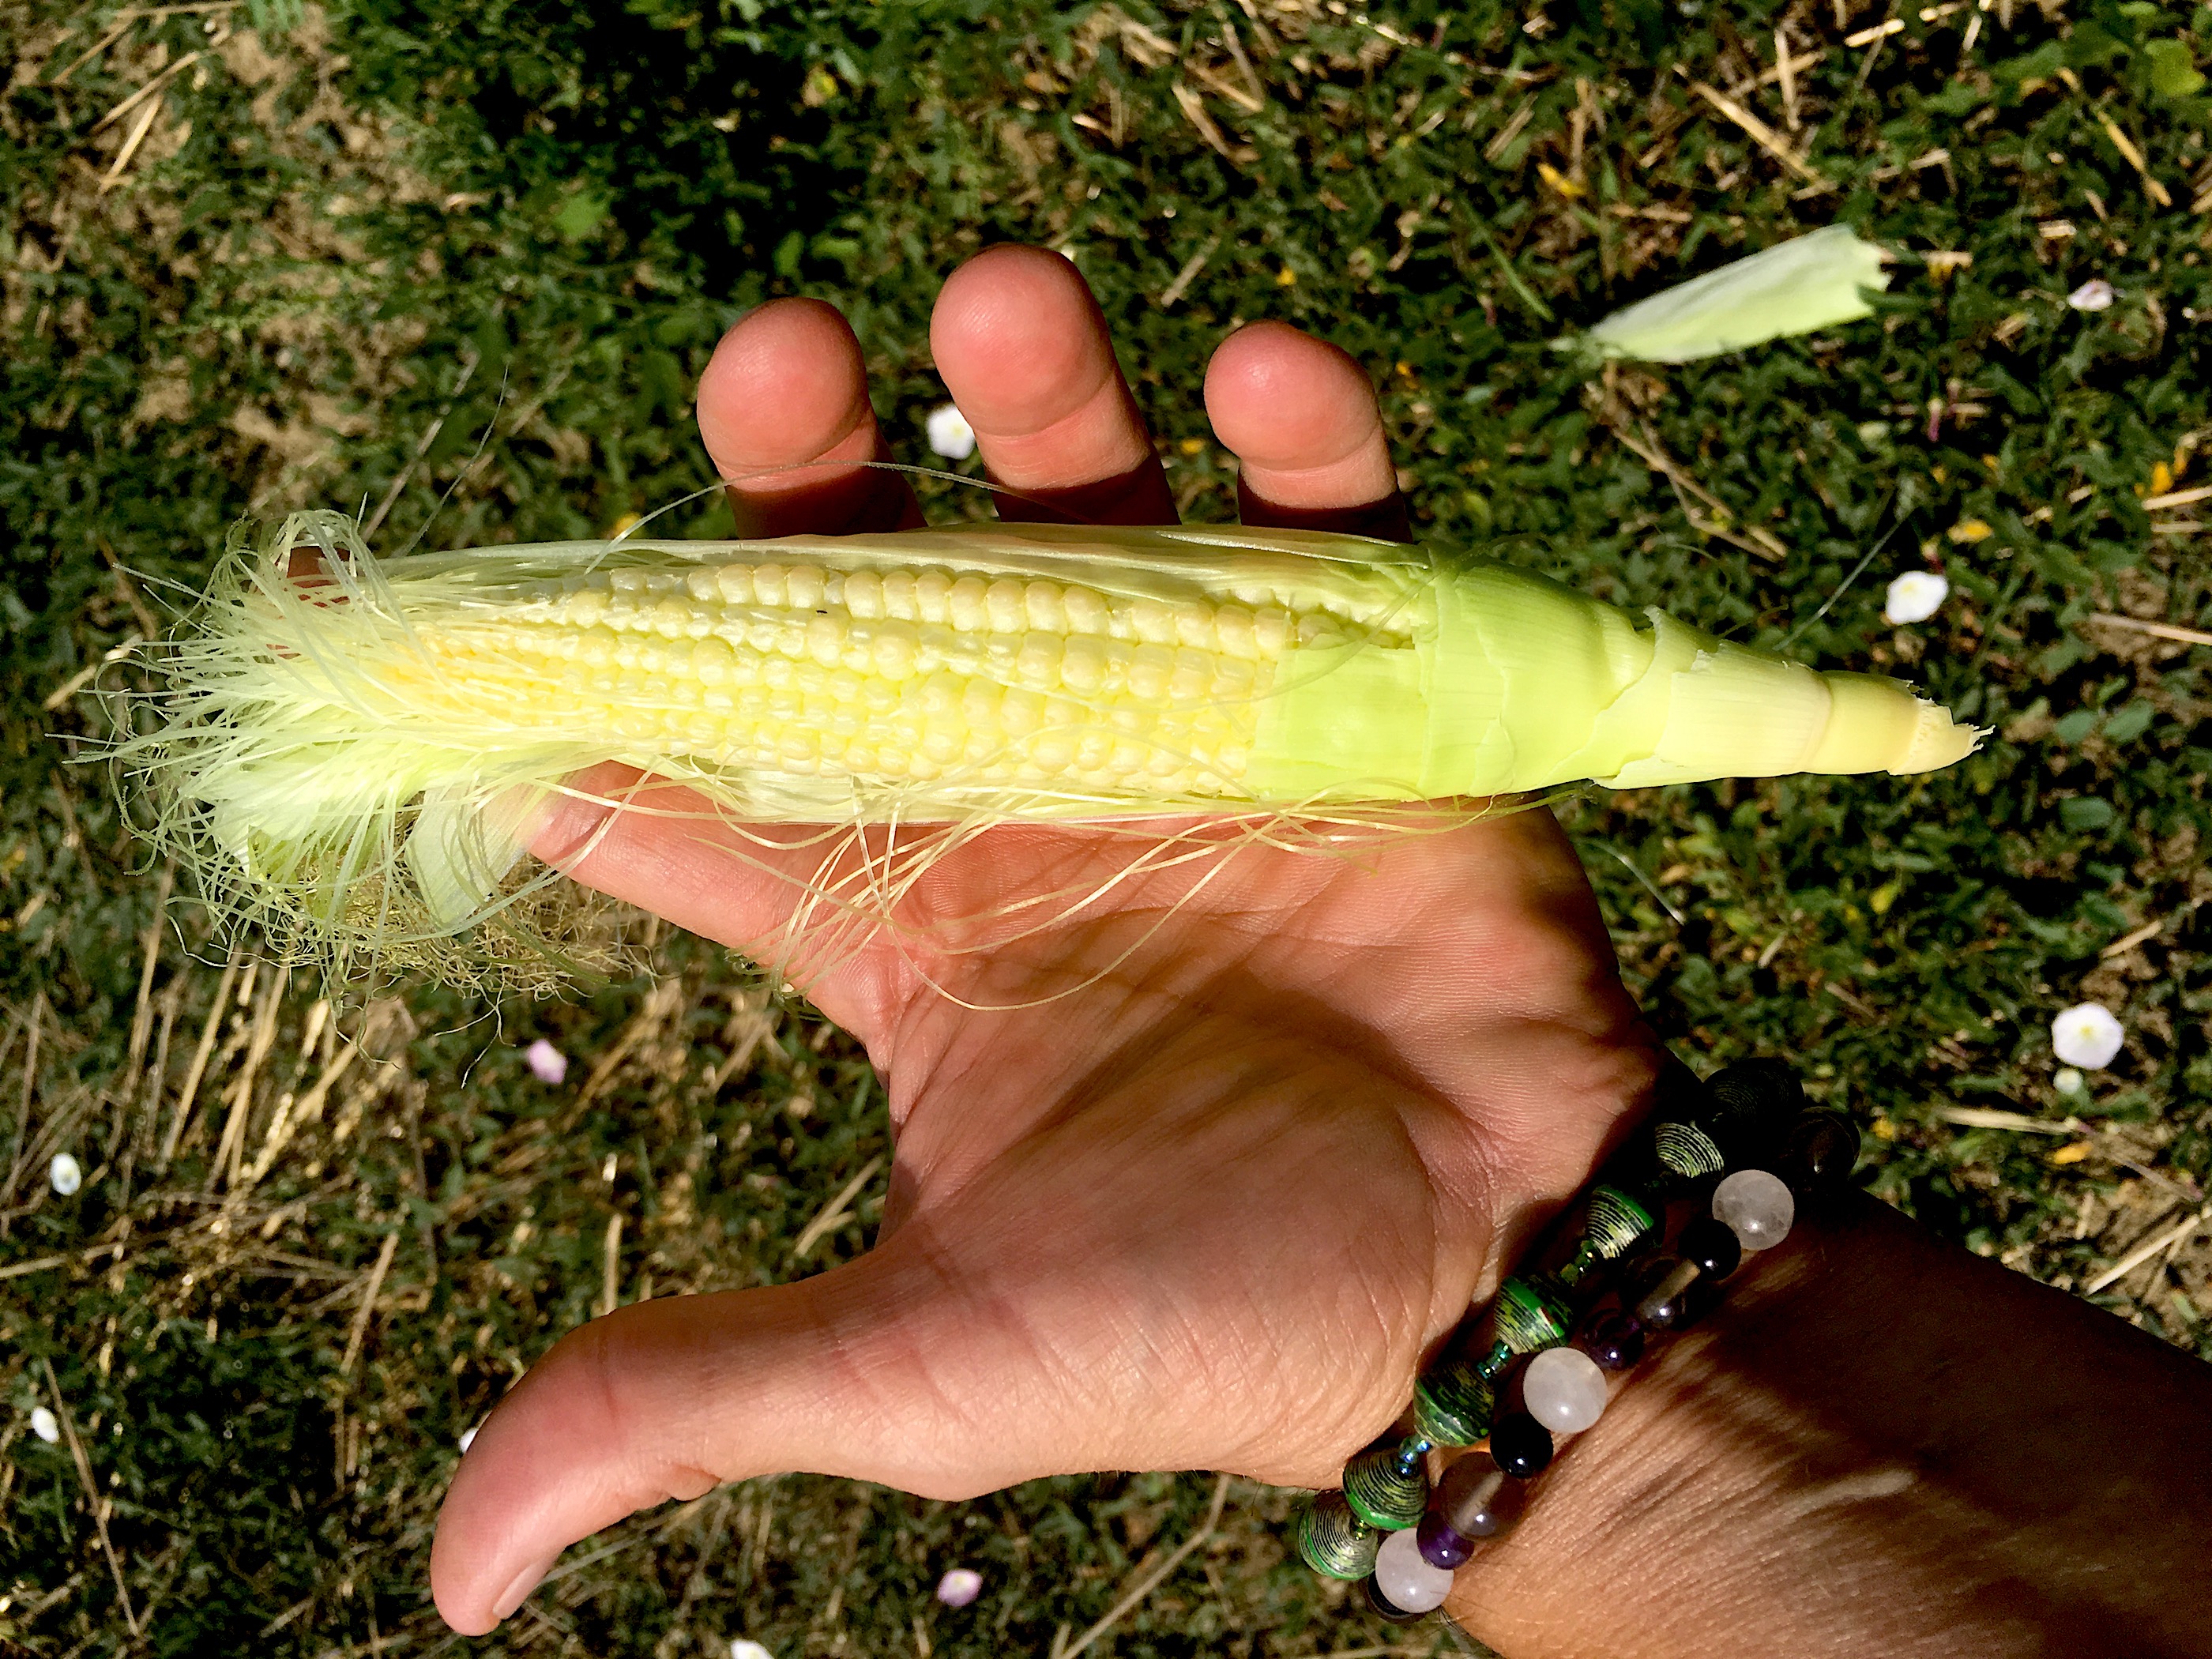 From-the-field baby corn (as opposed to the pickled baby corn you last tasted in that take-out kung pao chicken) is a thing of extravagant flavor. The original candy corn. You eat it whole, cob and all.